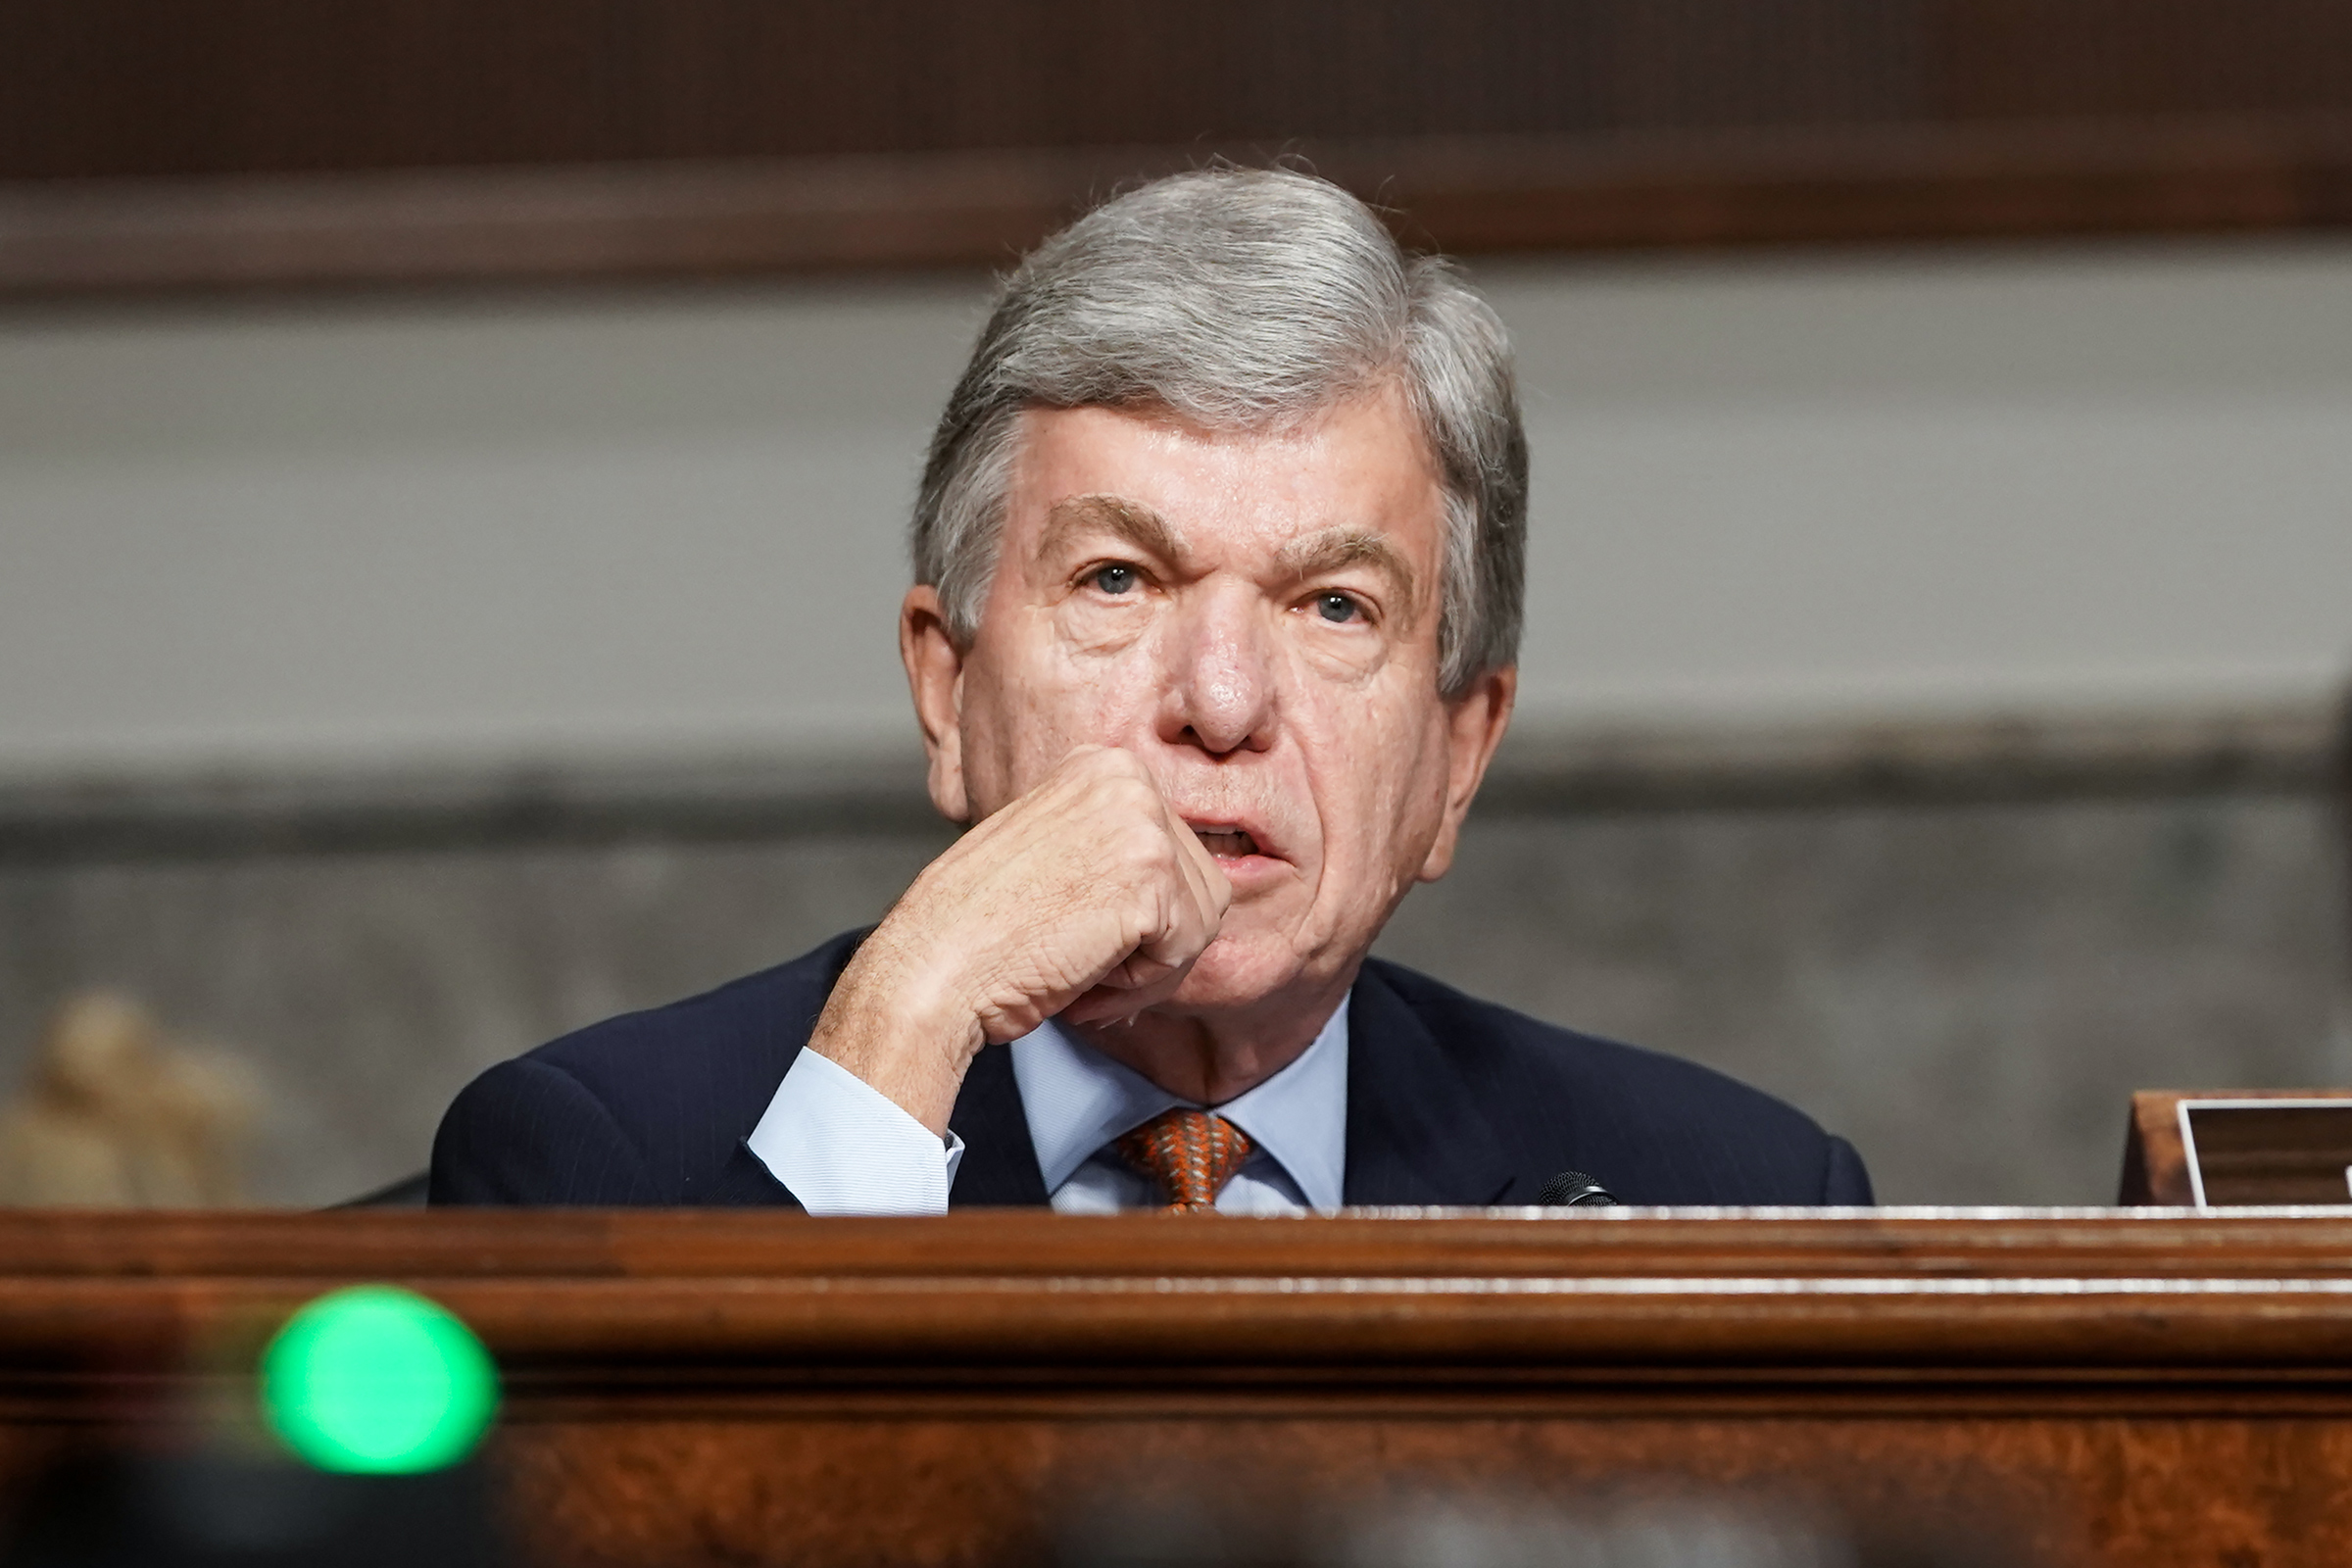 Senator Roy Blunt (R-MO) speaks during a Senate Committee hearing in Washington, D.C., on March 3, 2021.  (Greg Nash—The Hill/Bloomberg/Getty Images)